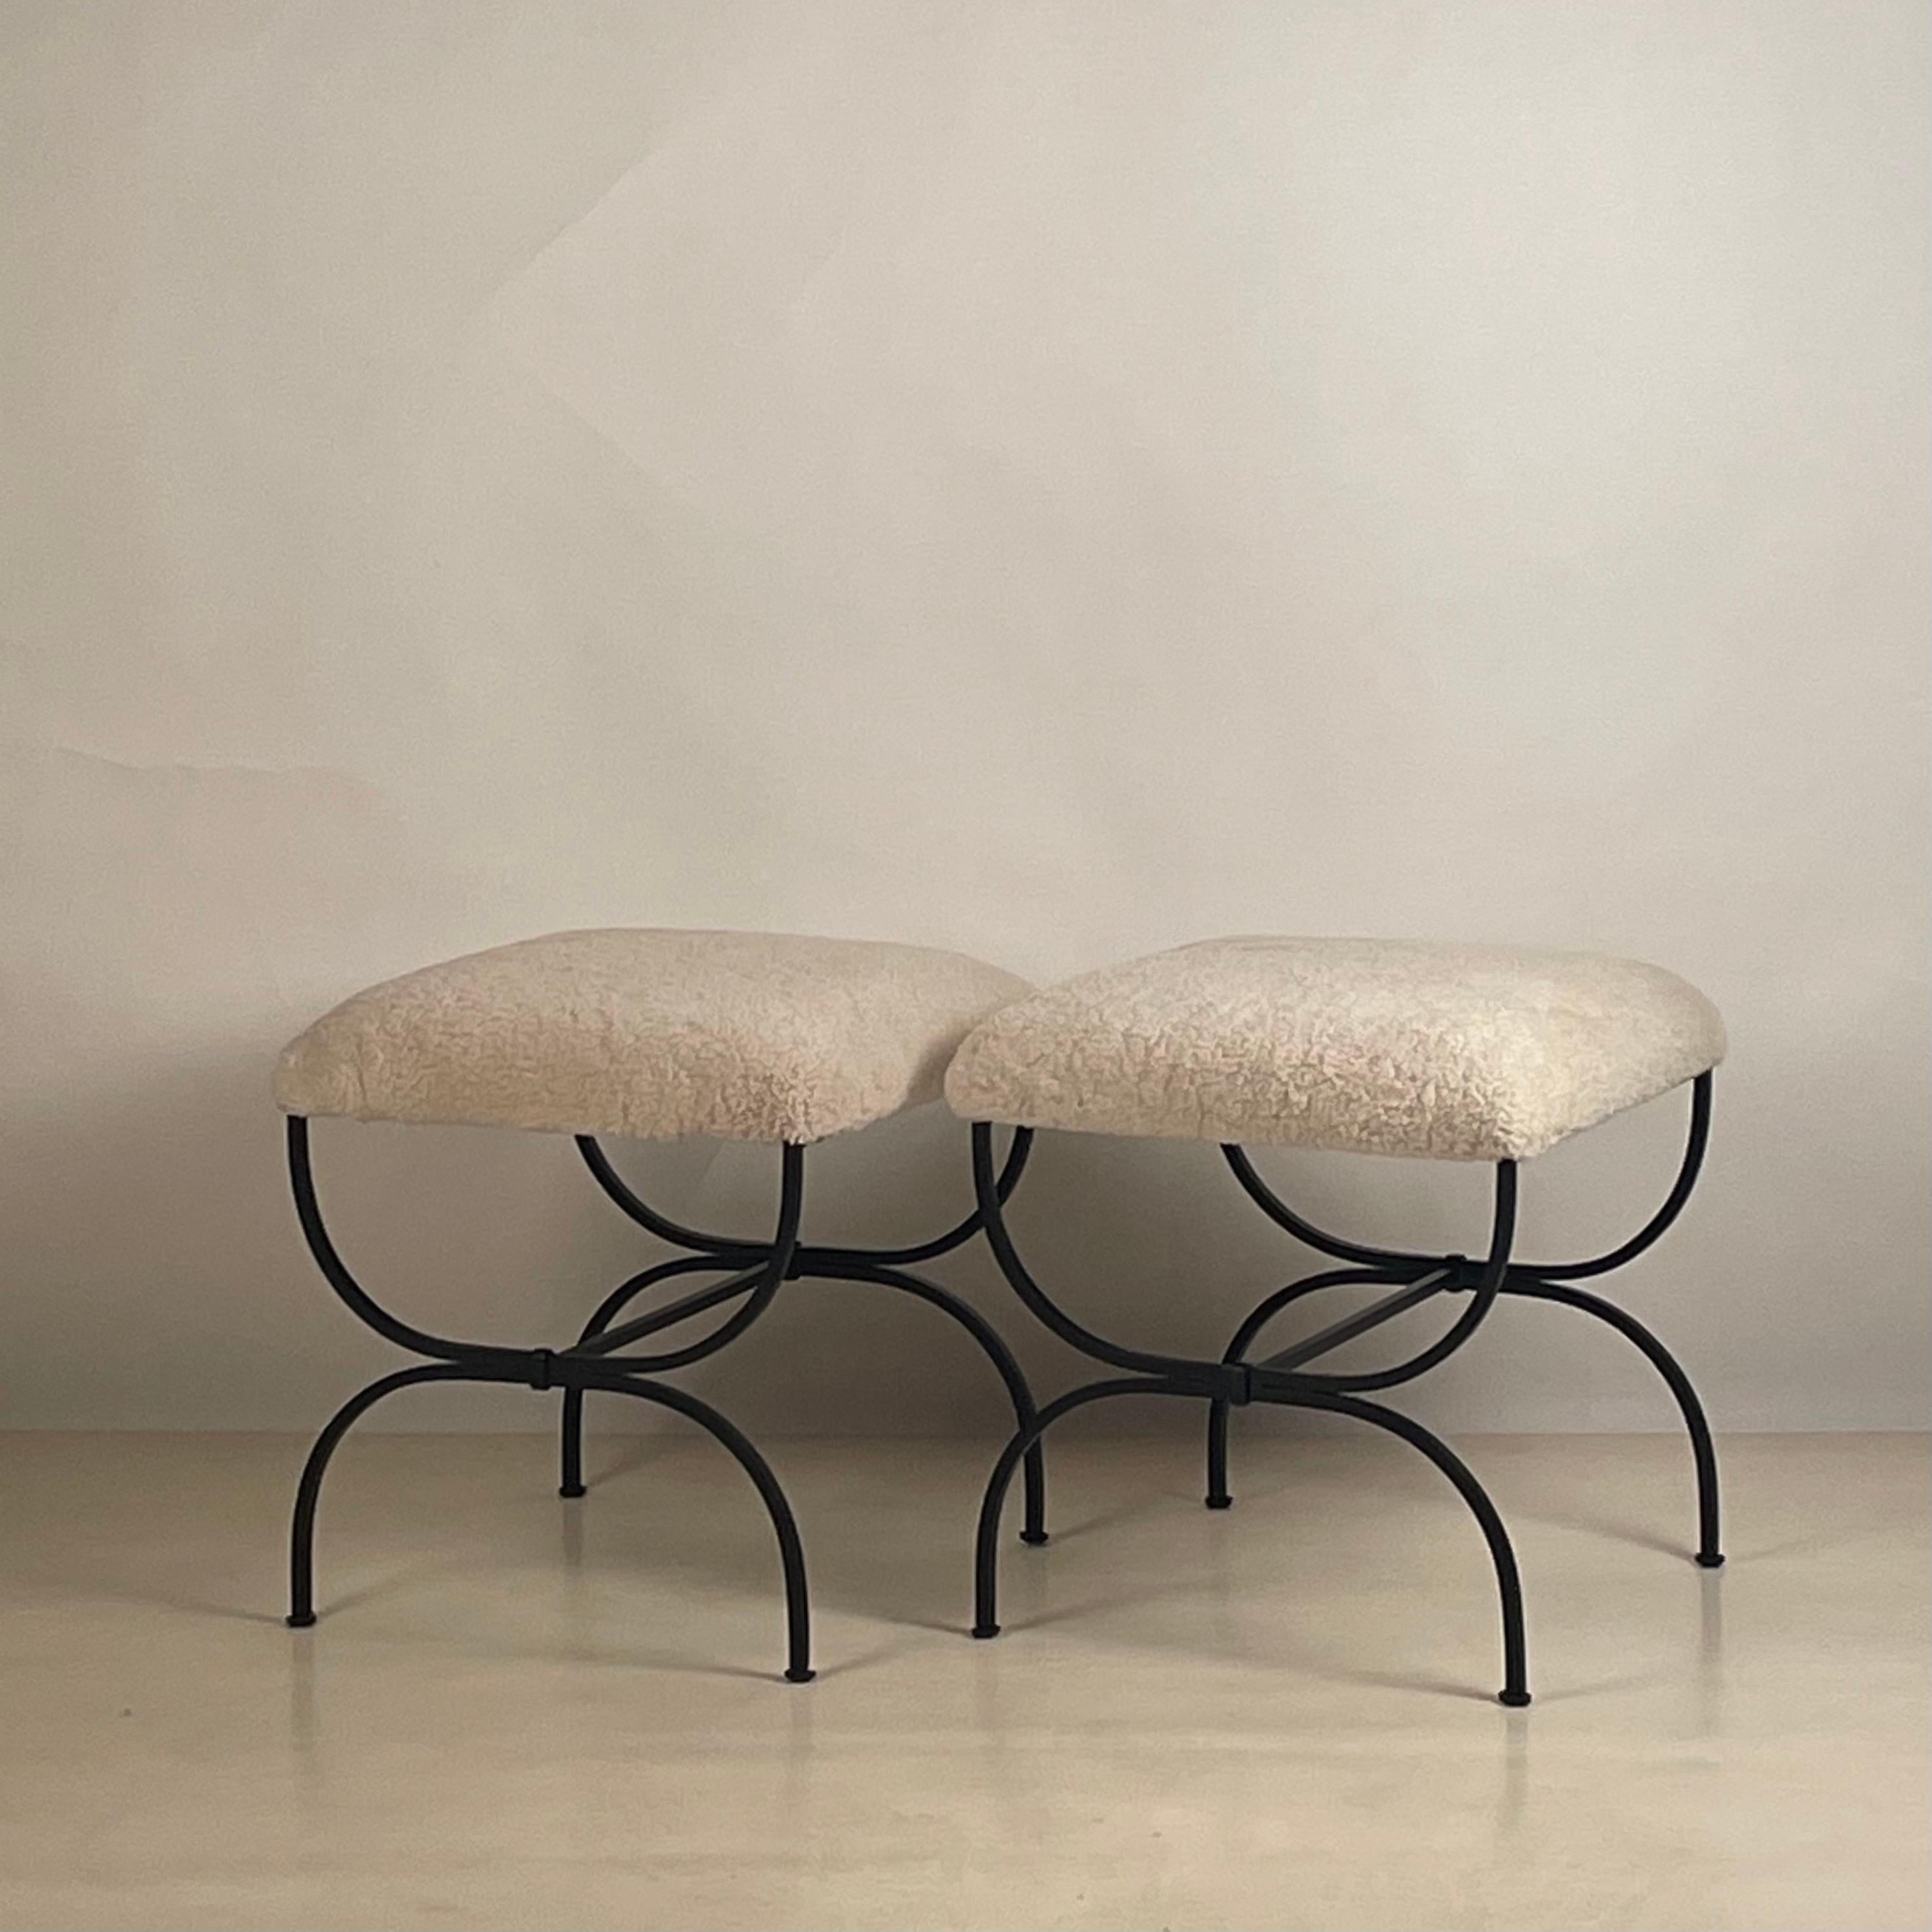 Pair of shearling 'Strapontin' stools by Design Frères.

Chic and understated.

Also great as a two-part bench.